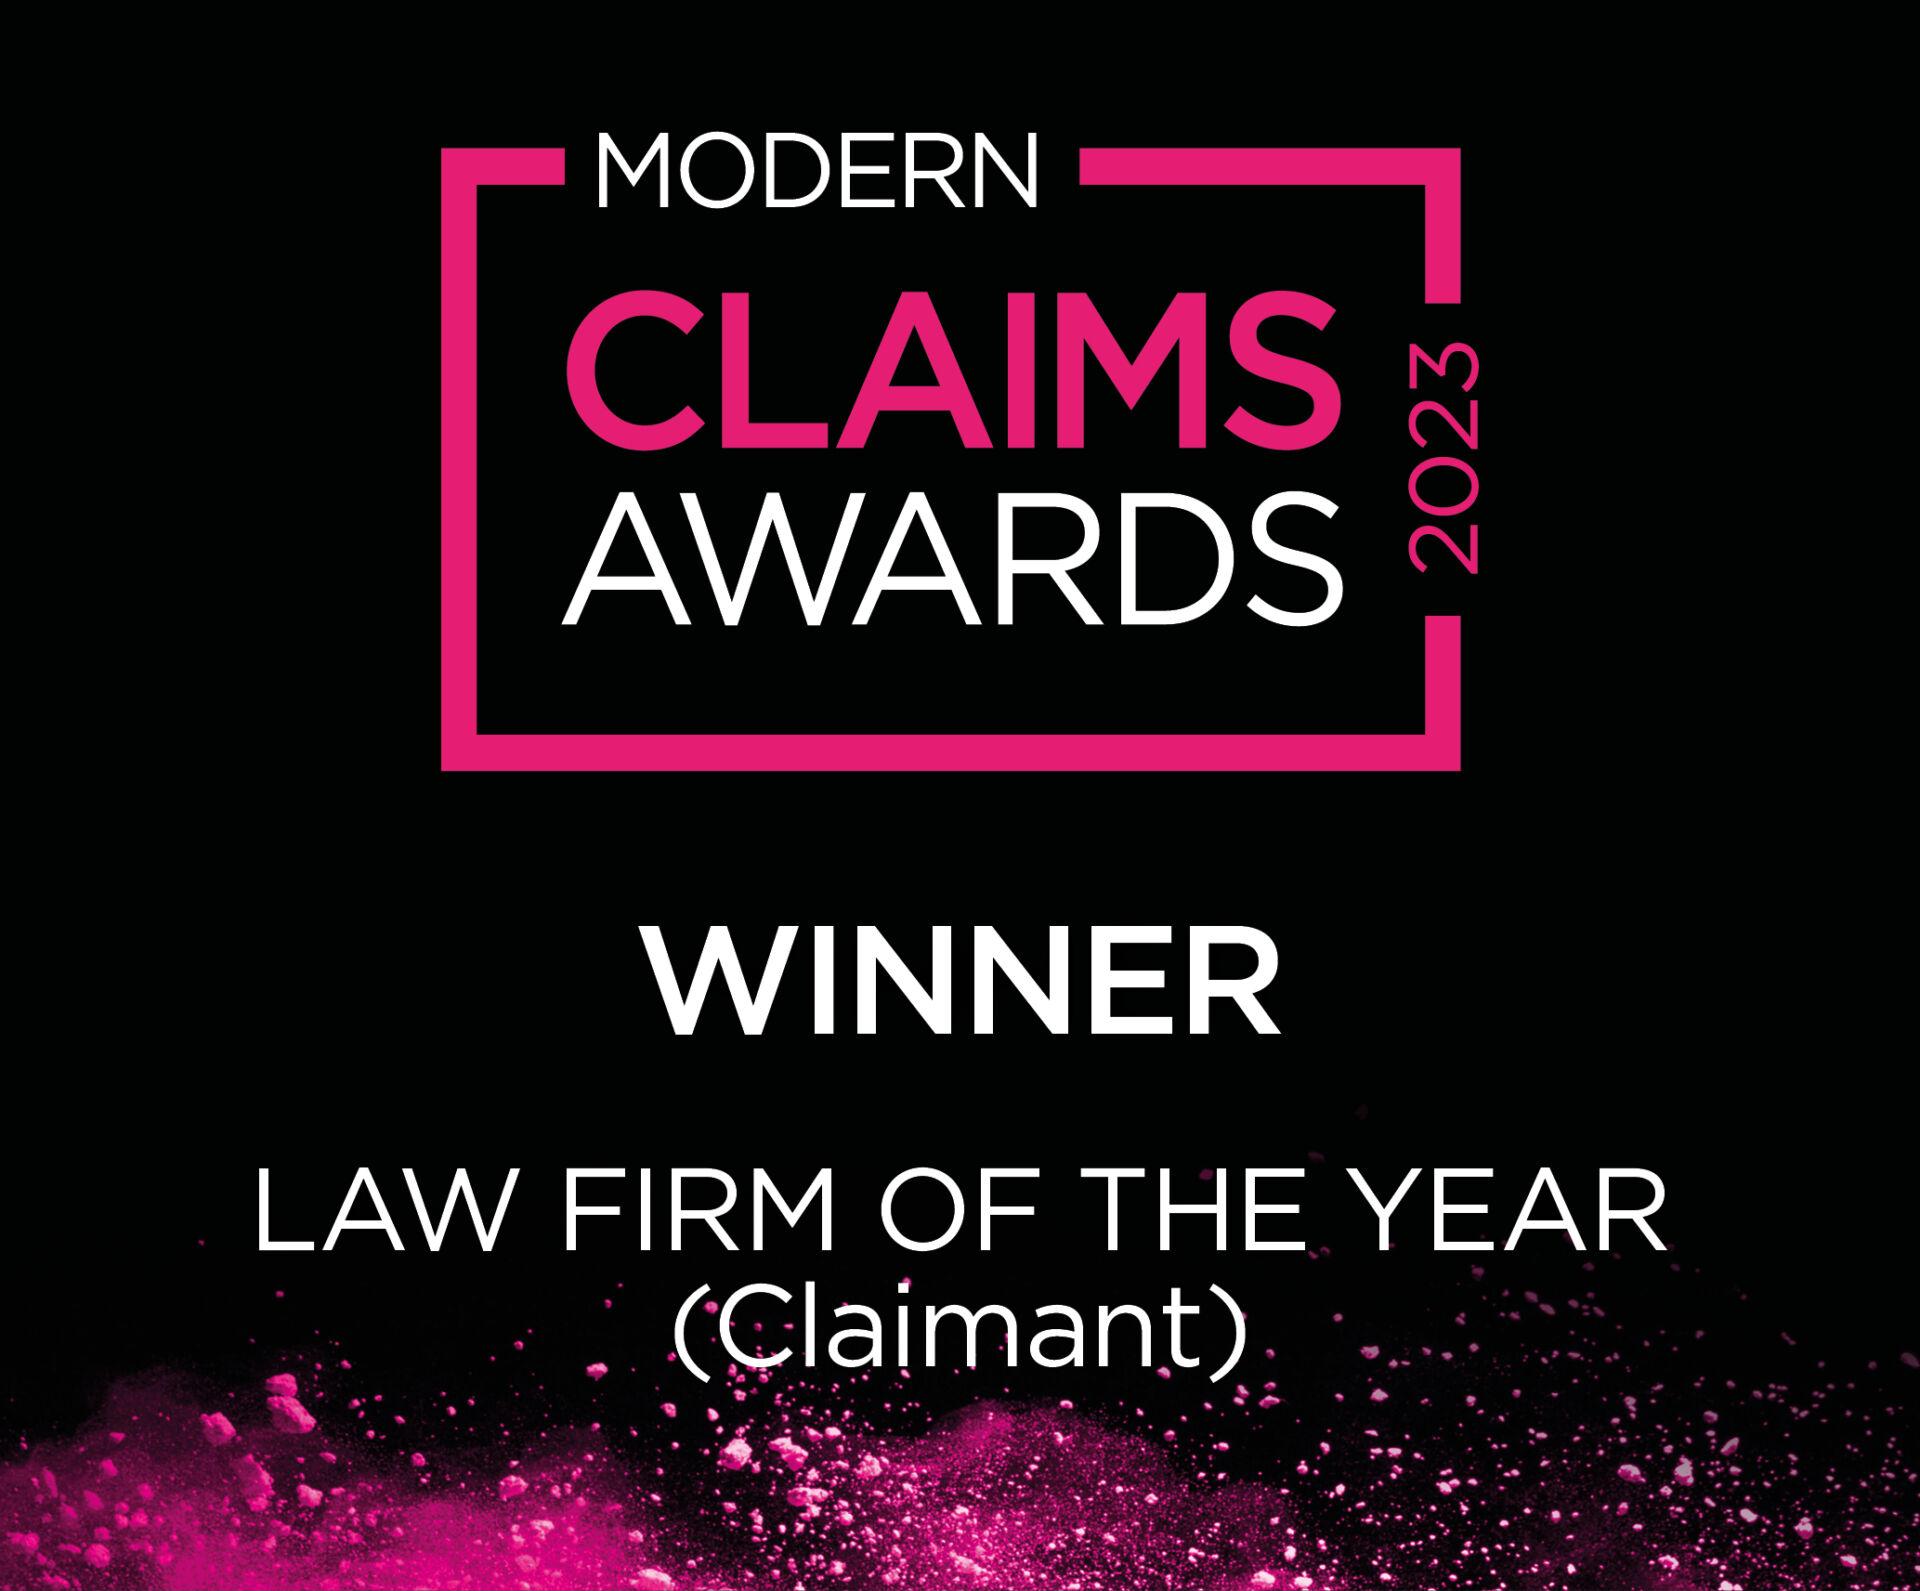 Claimant Law Firm of the Year 2023 HCC Solicitors